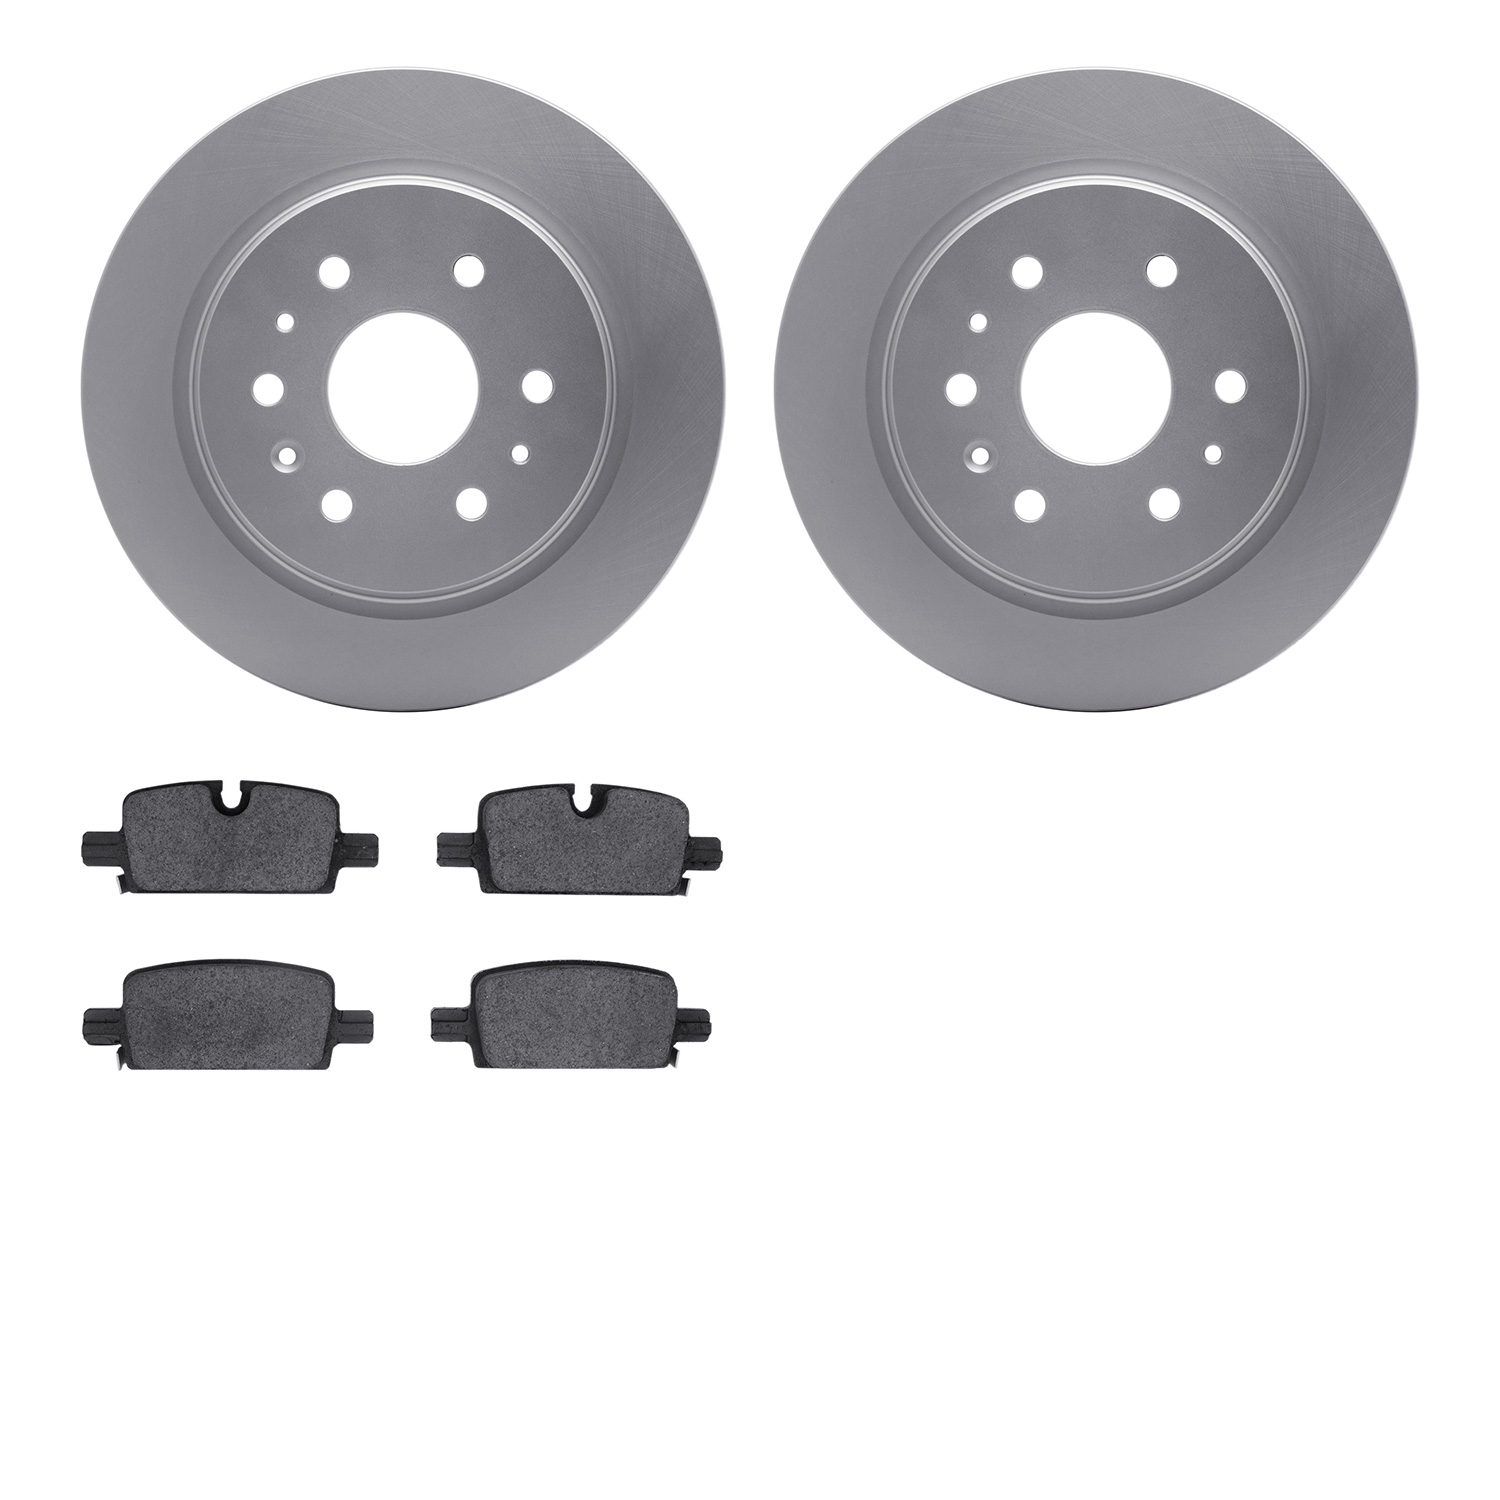 4402-47011 Geospec Brake Rotors with Ultimate-Duty Brake Pads Kit, Fits Select GM, Position: Rear